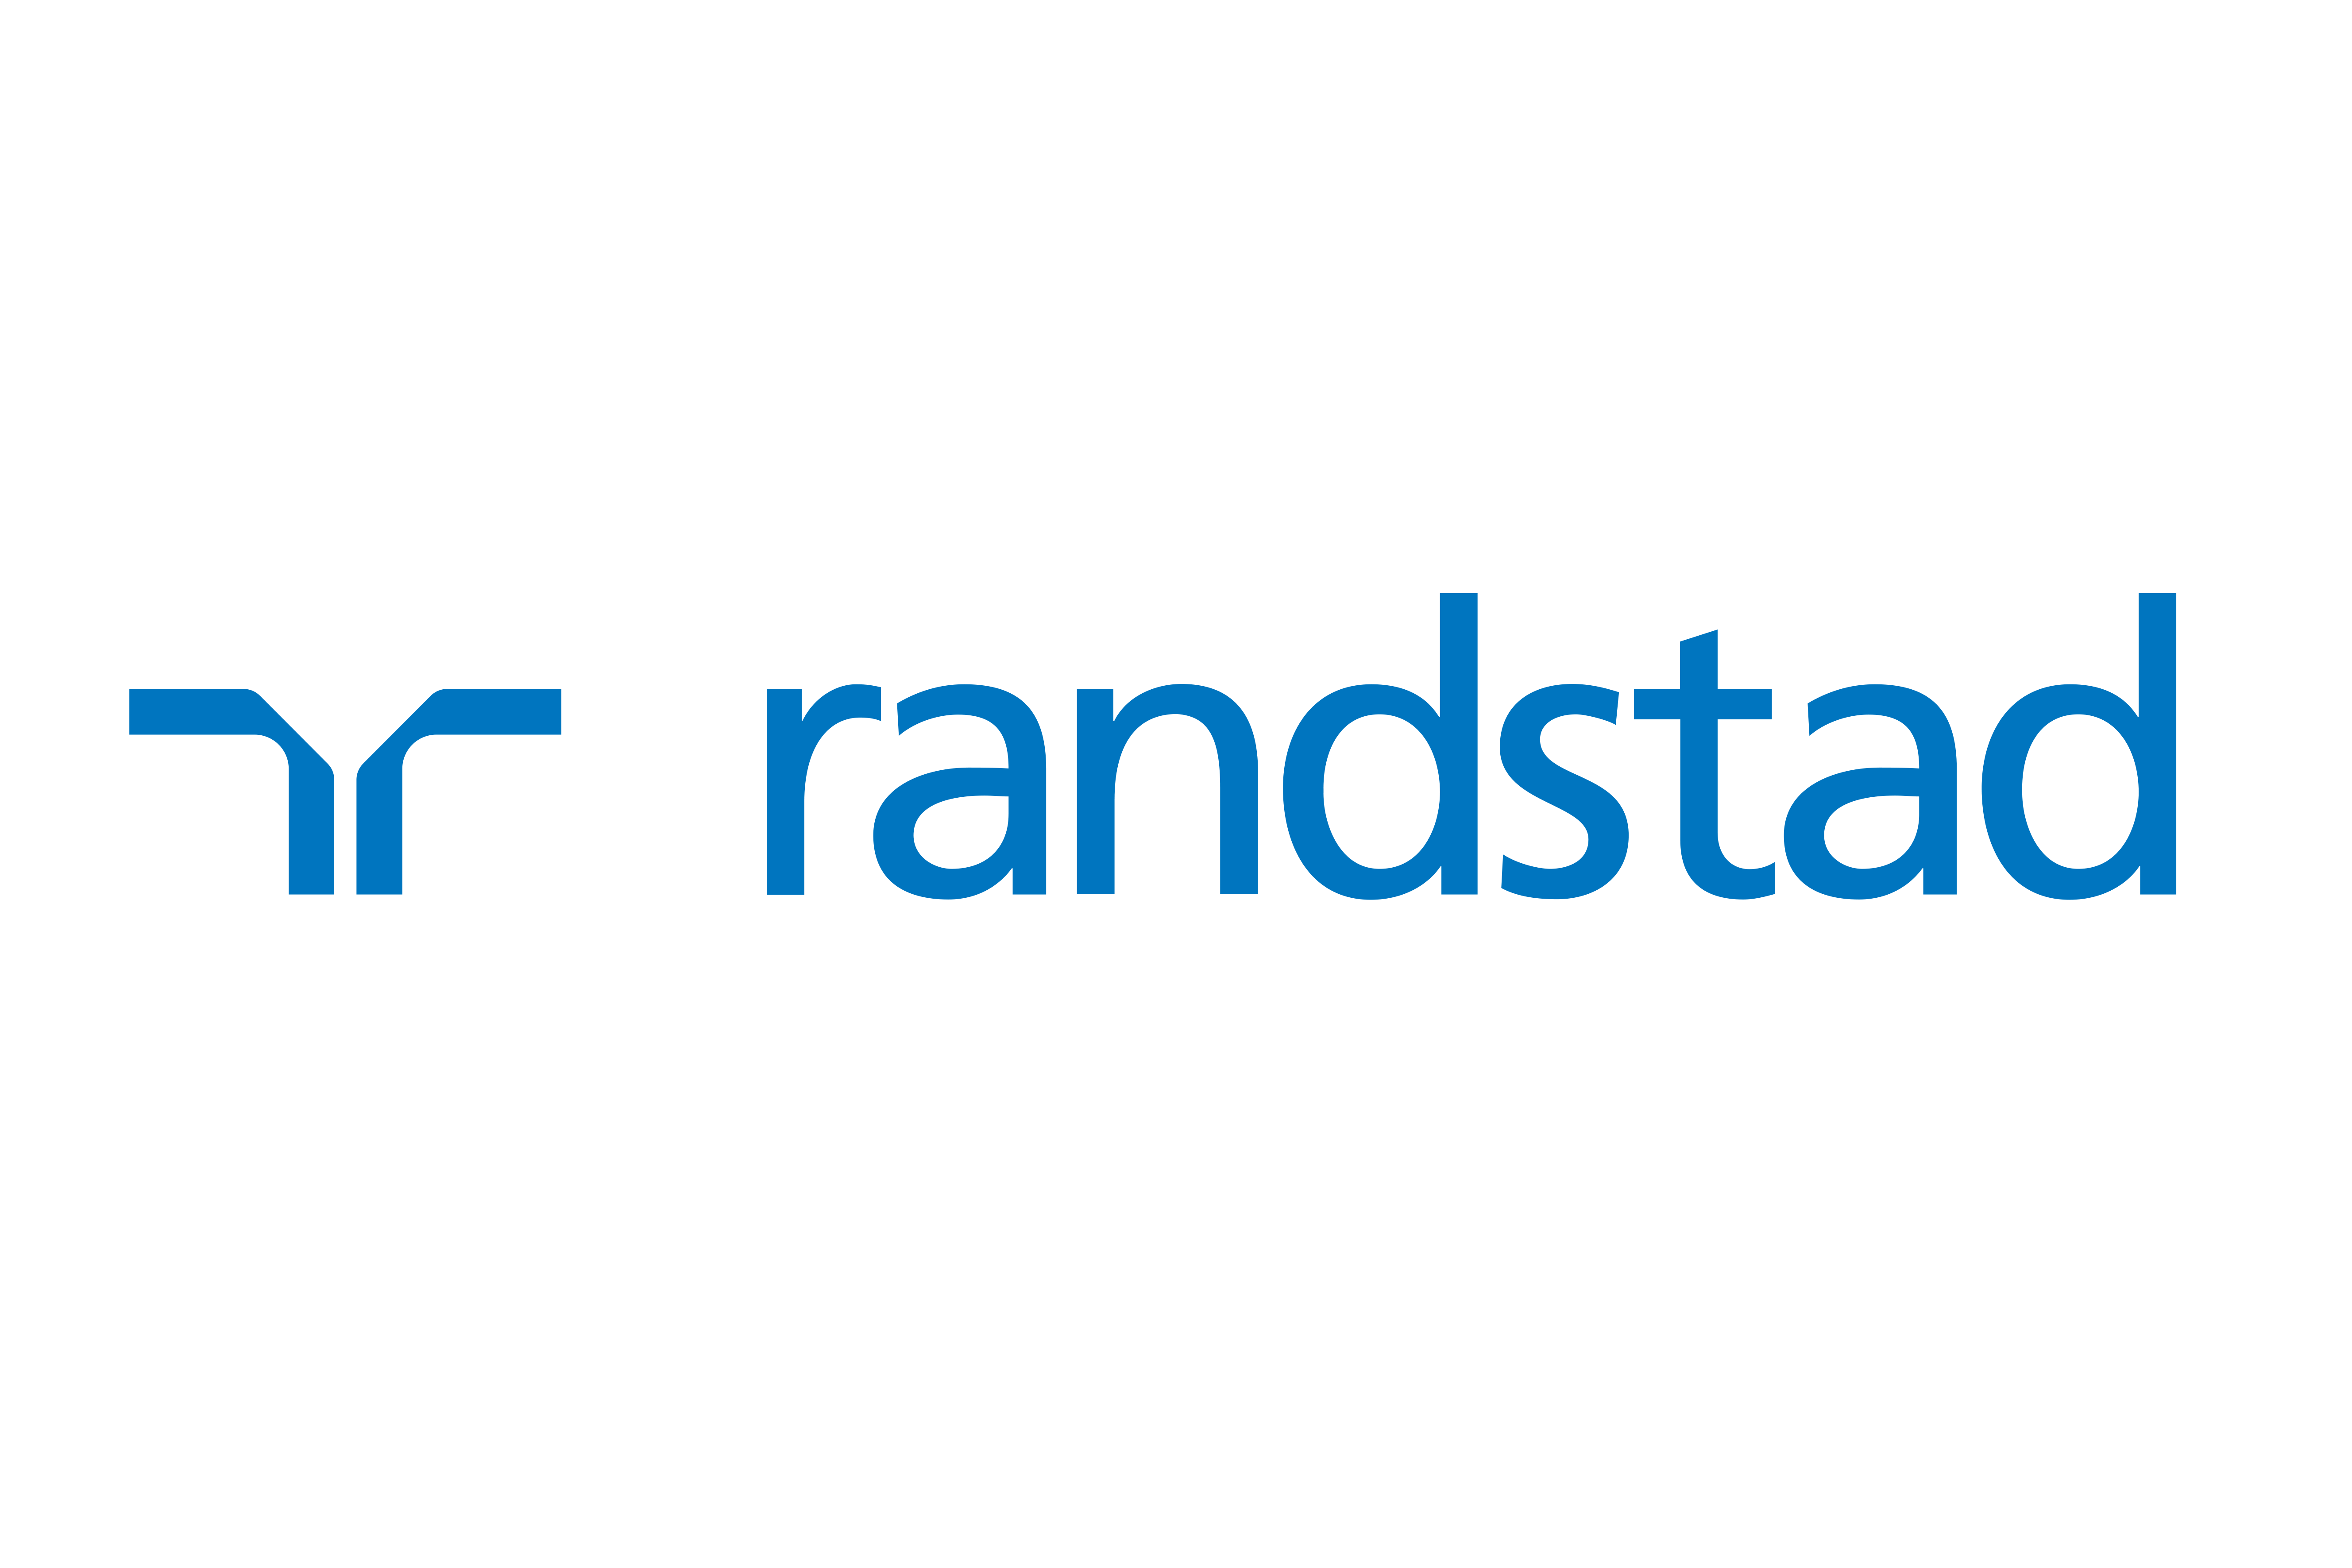 Cooperation with the company - Randstad